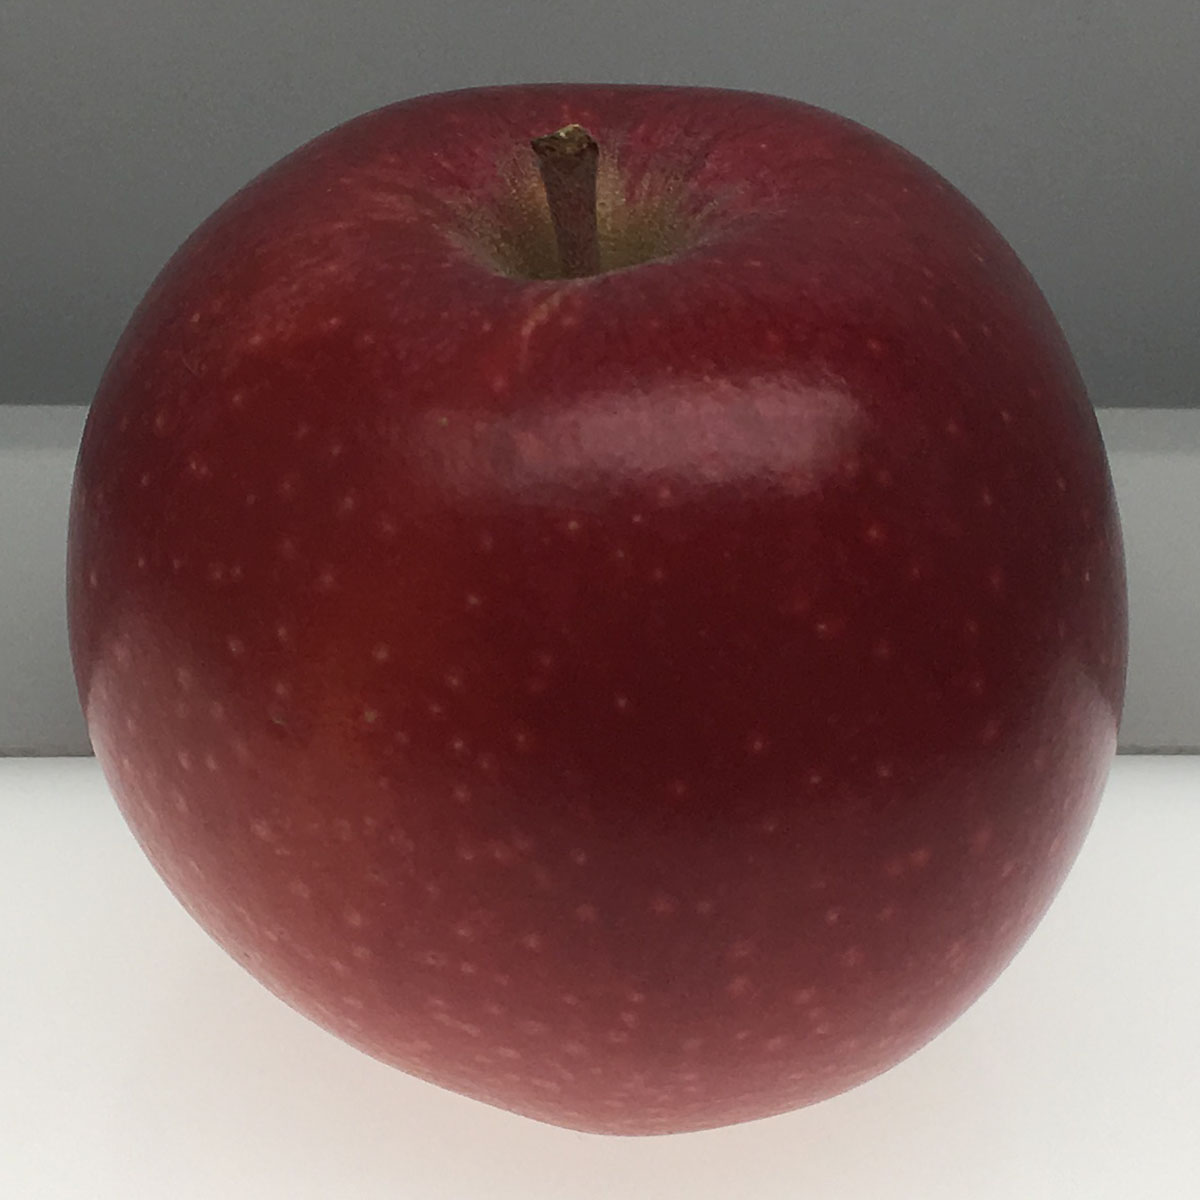 Hauer Pippin apple